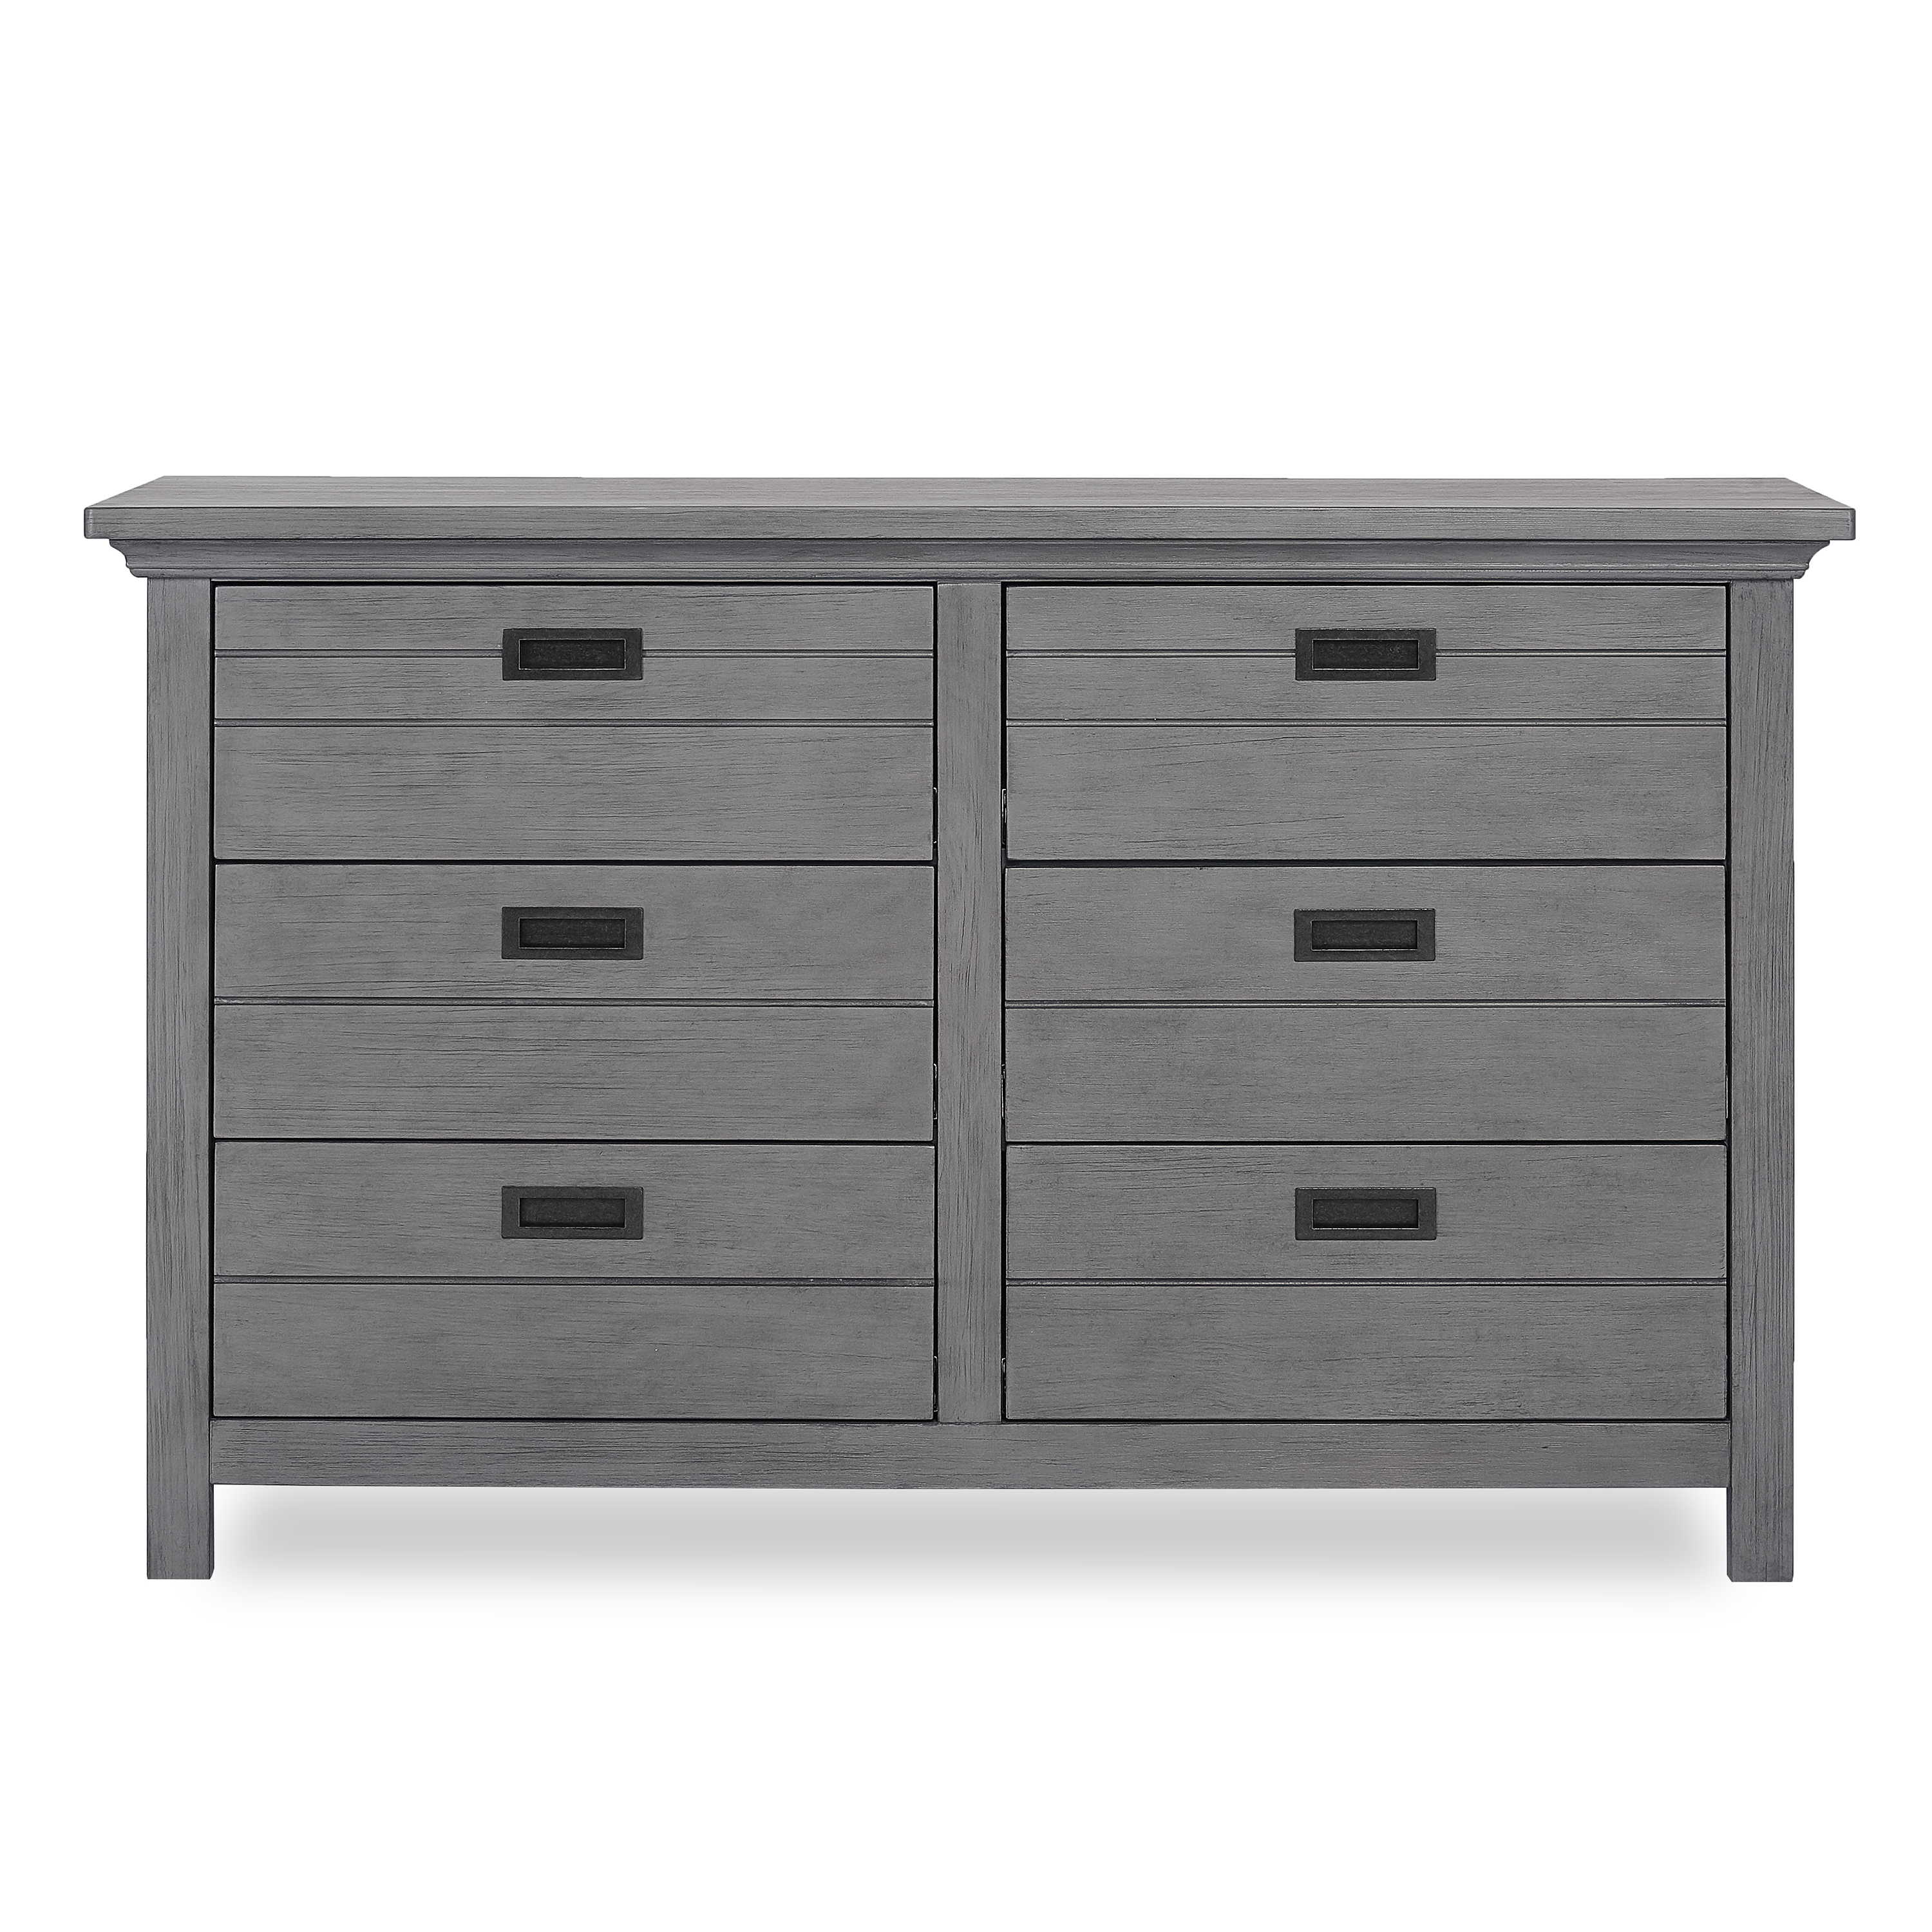 Evolur Waverly 6 Drawer Double Dresser Rustic Gray - image 3 of 3